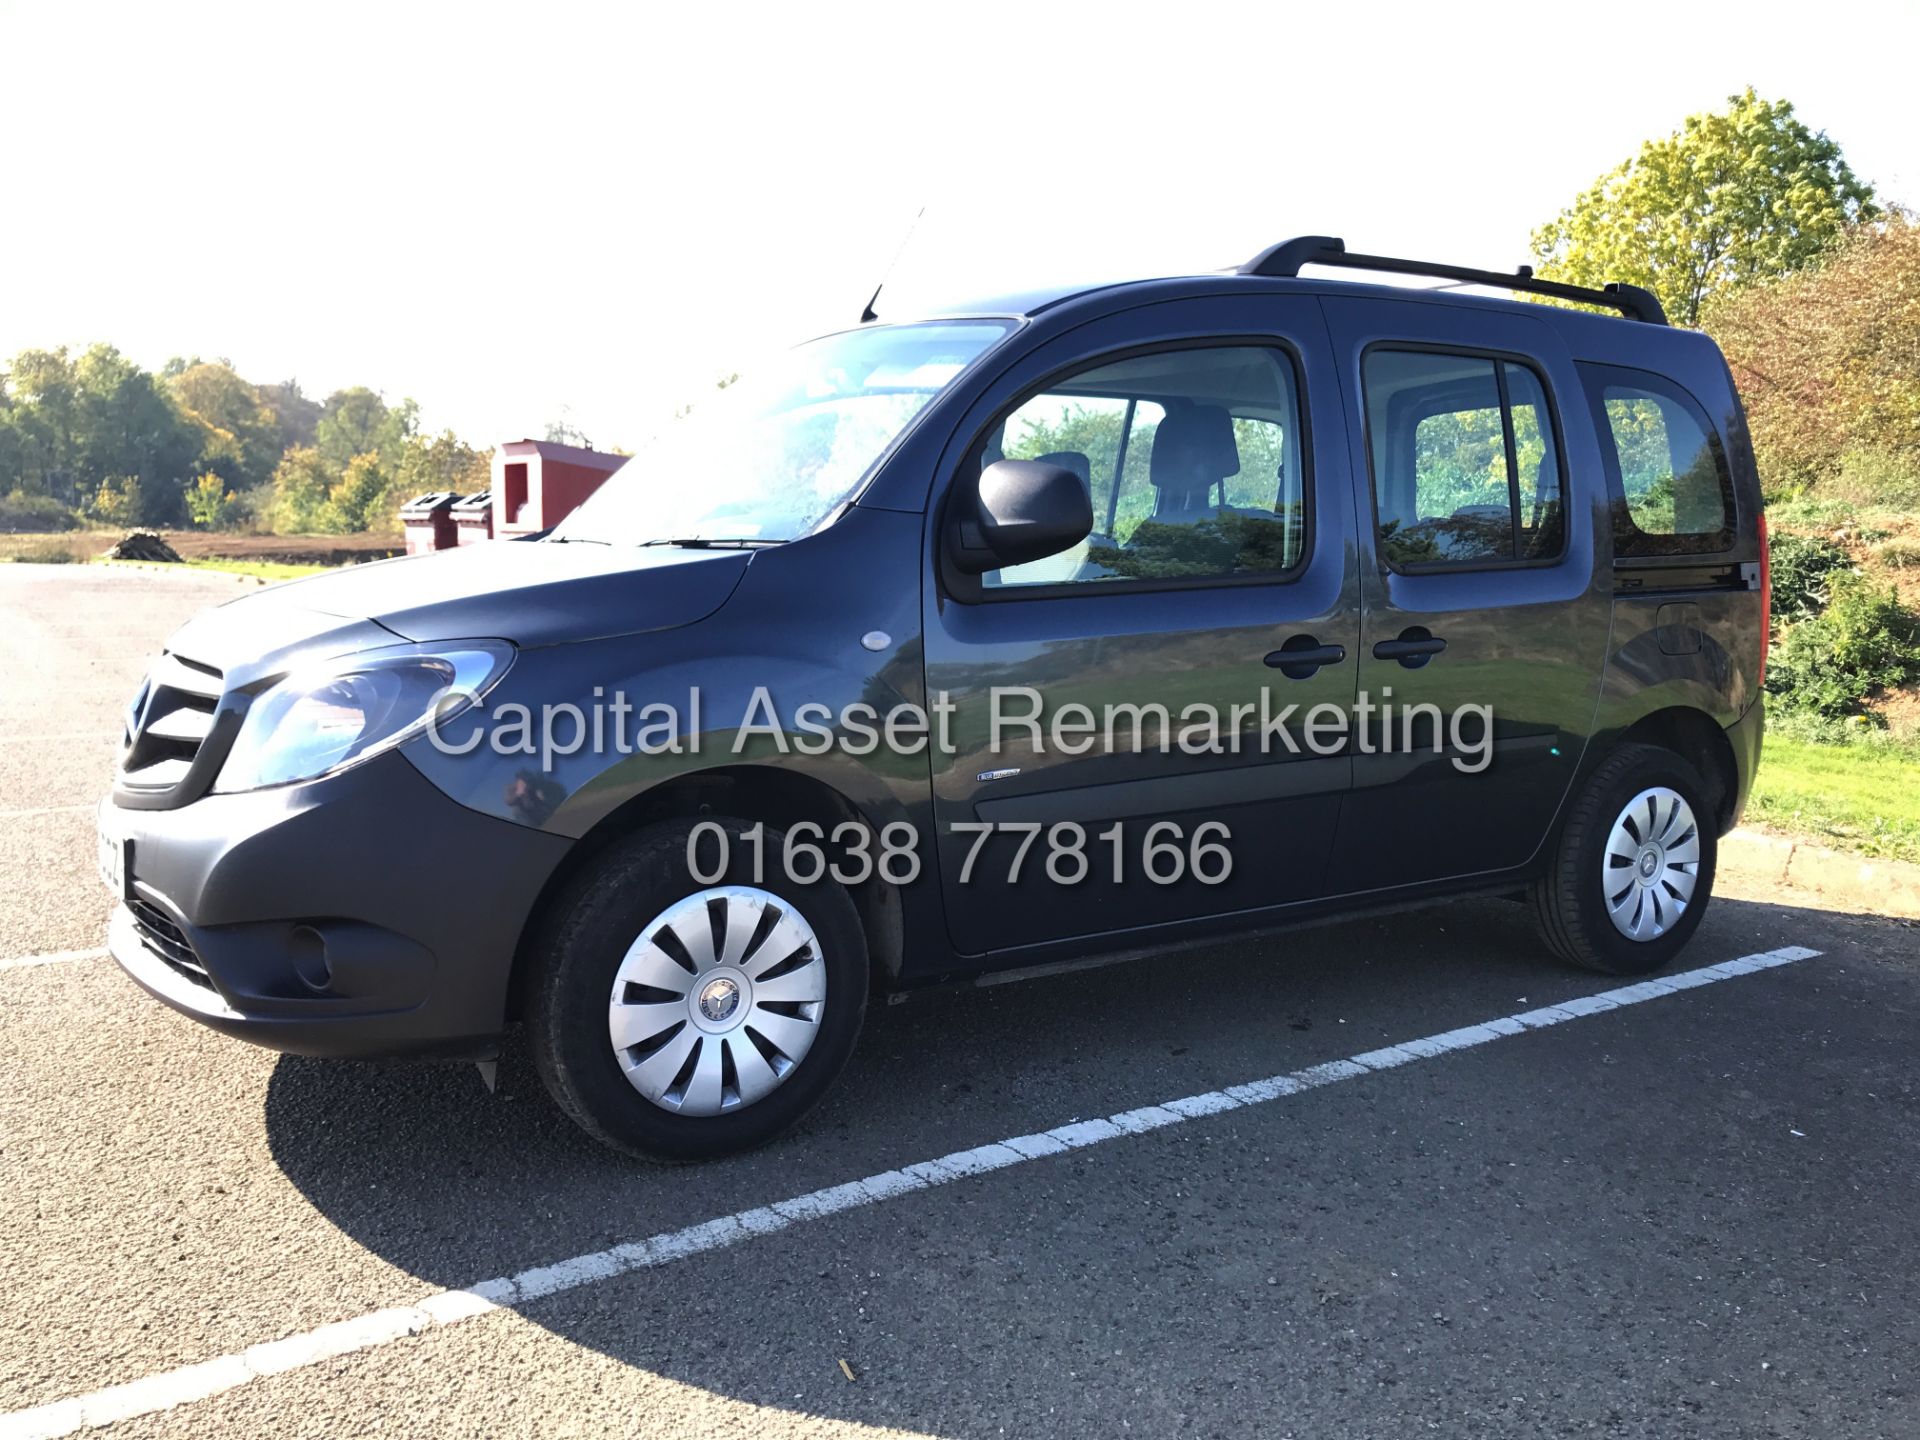 (ON SALE) MERCEDES CITAN CDI "TRAVELINER" 5 SEATER (2016 MODEL) 1 OWNER - ONLY 31K FSH -AIR CON-RARE